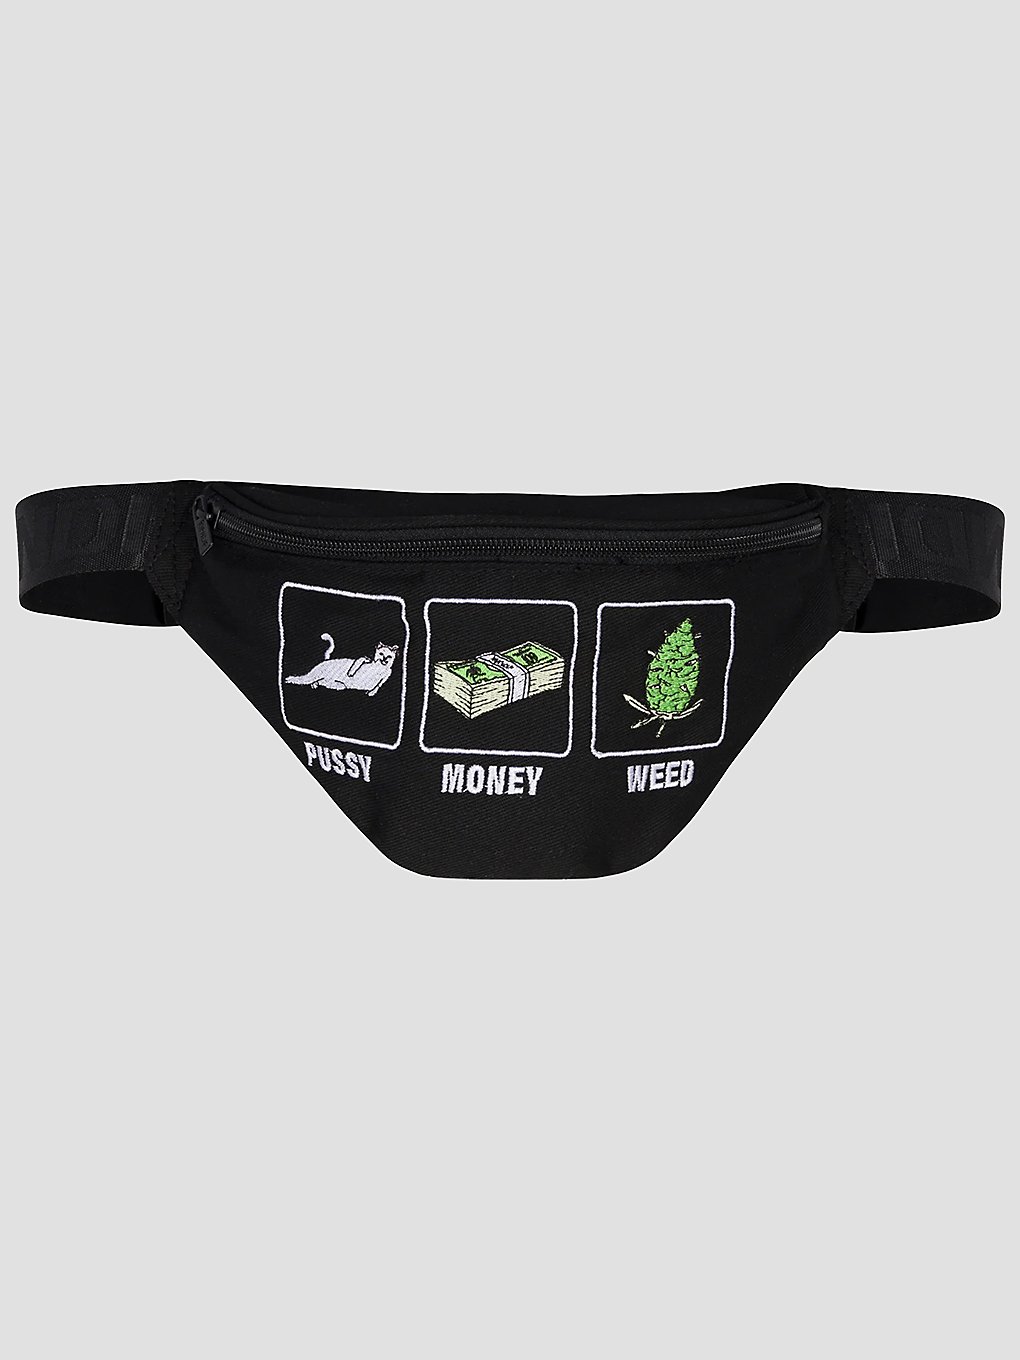 Image of RIPNDIP Pussy, Money, Weed Fanny Pack Borsa a Tracolla nero